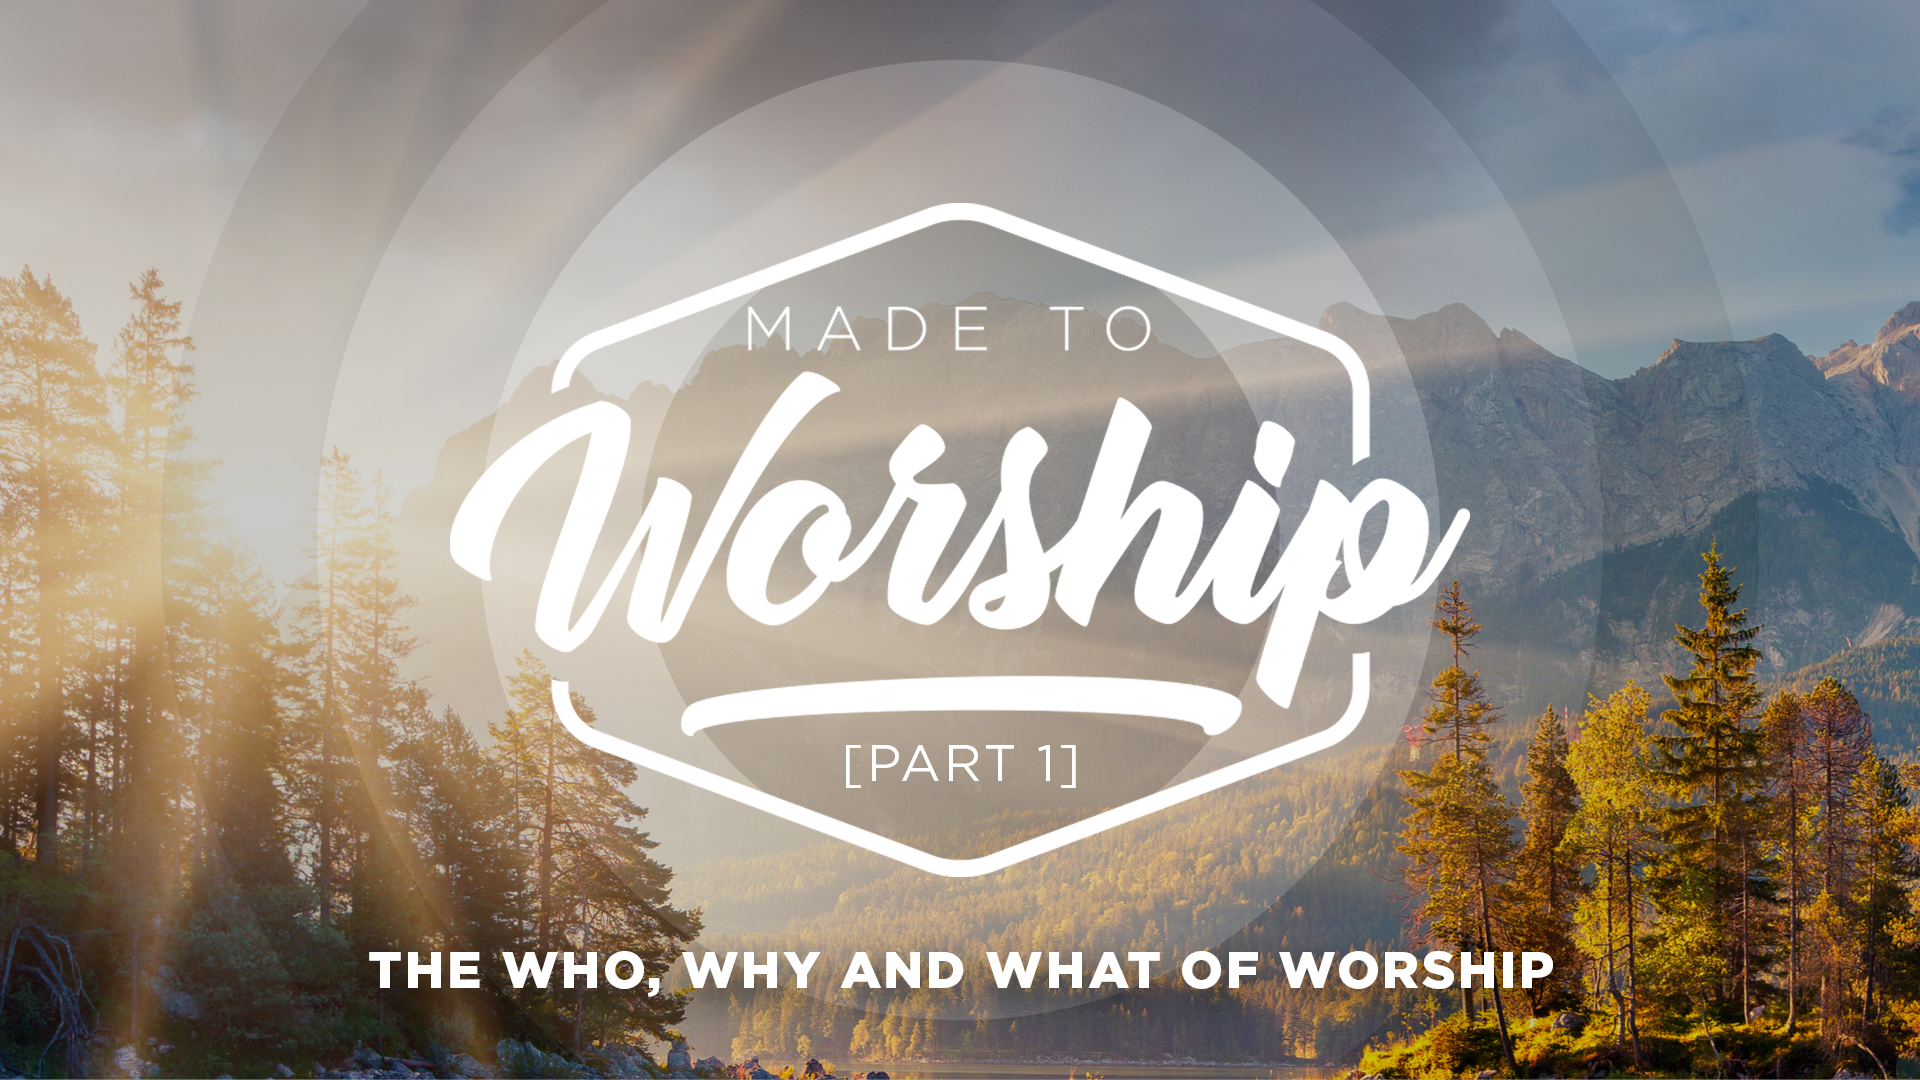 Made To Worship - Part 1 - The Who, Why And What Of Worship